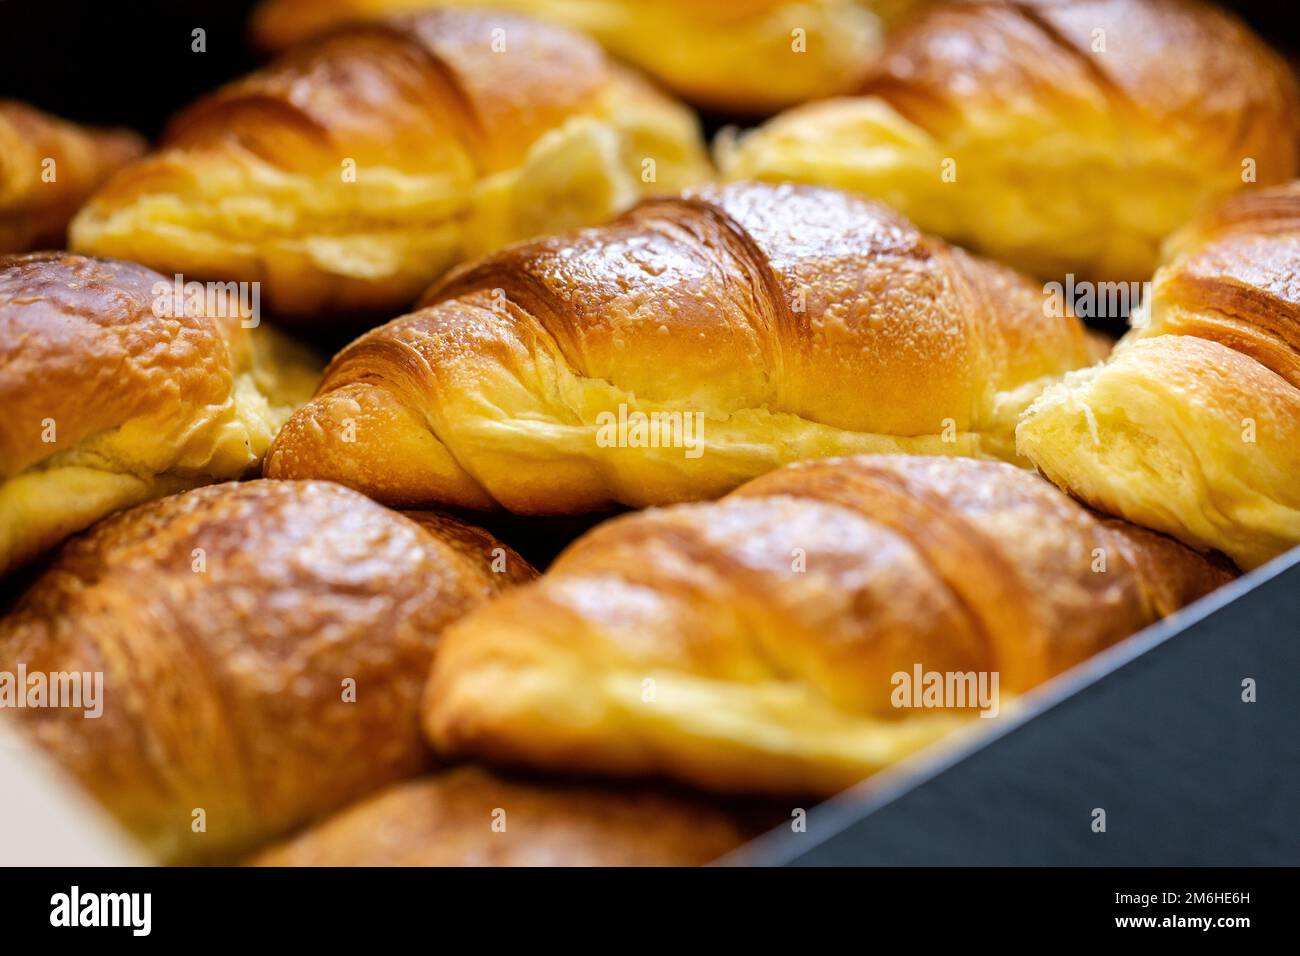 Selective focus on a croissant in a box full of pastries. Concept of breakfast or lunch break with packaged sweets, a delight for the palate but with Stock Photo